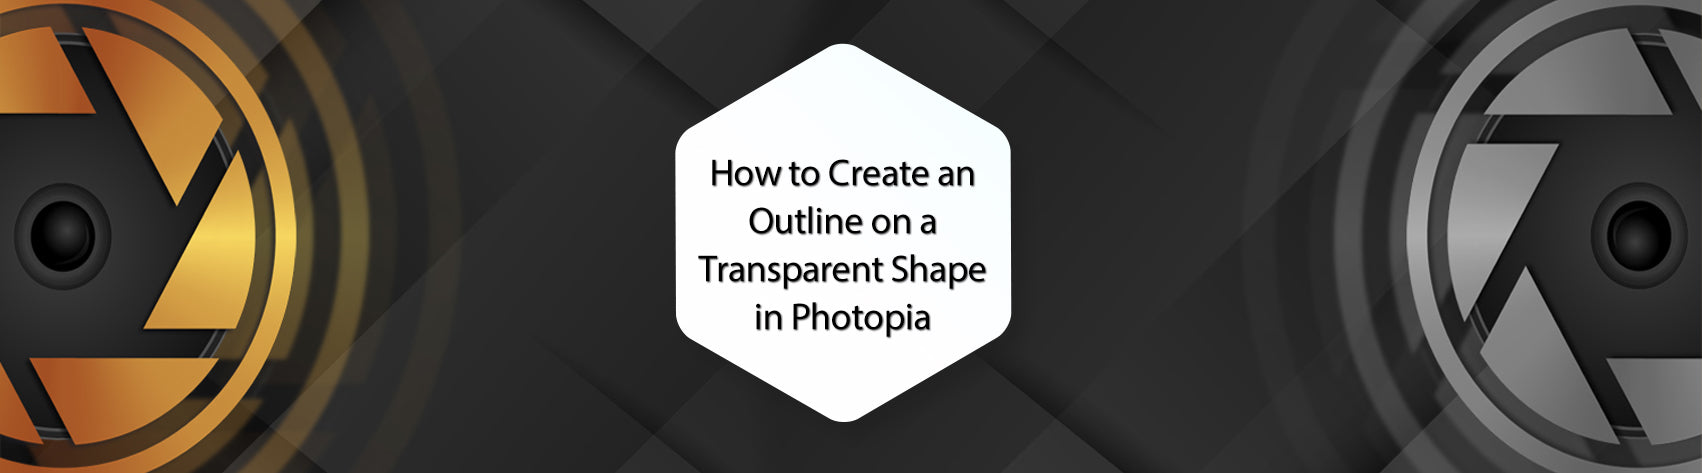 How to Create an Outline on a Transparent Shape in Photopia